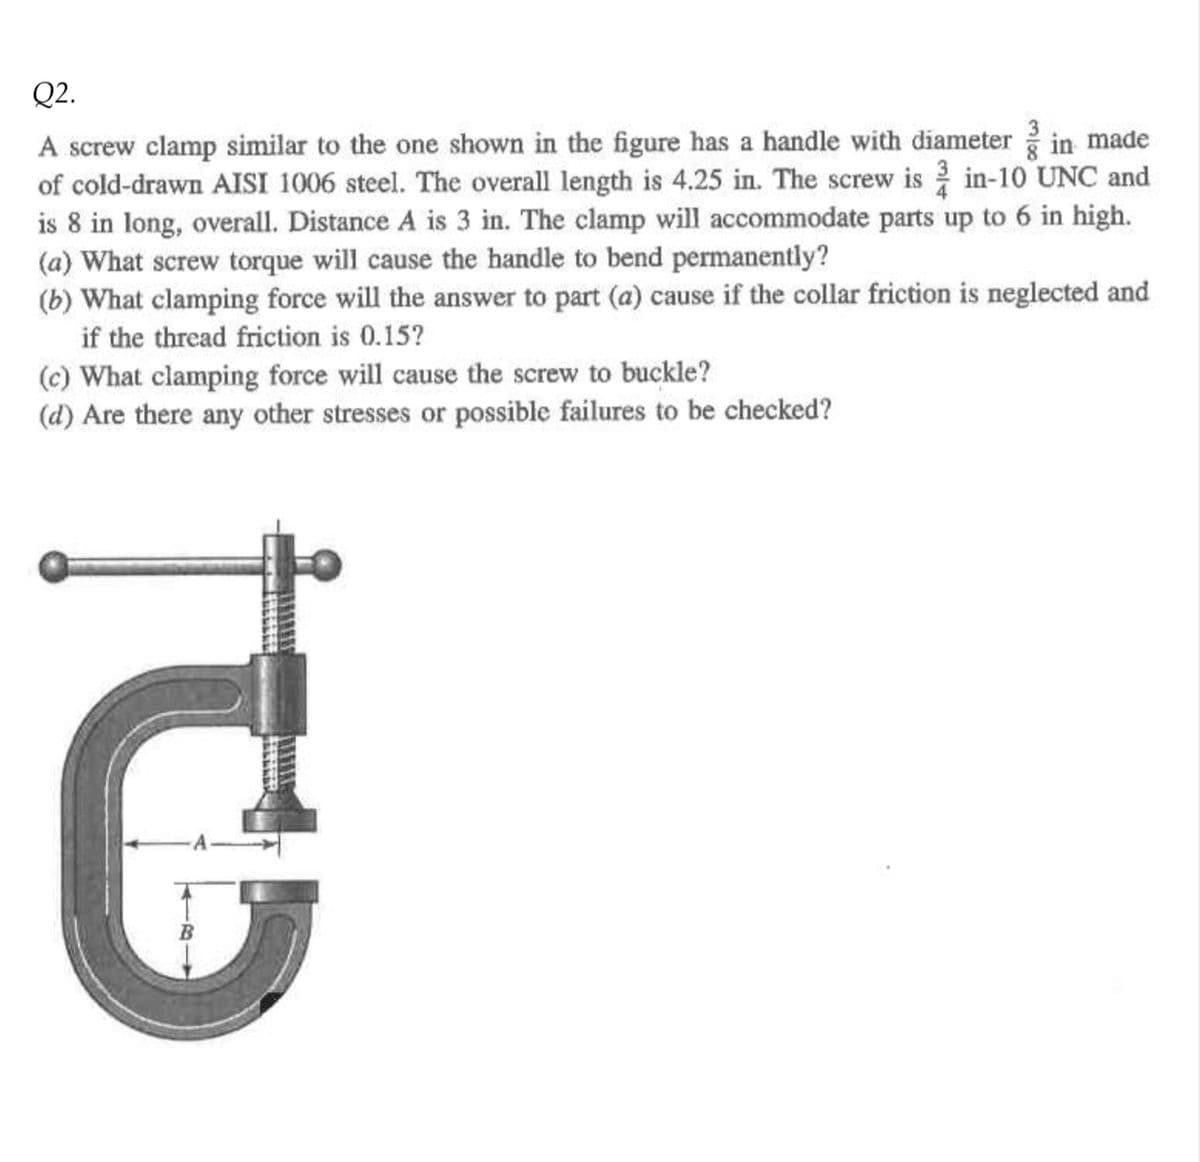 Q2.
A screw clamp similar to the one shown in the figure has a handle with diameter in made
of cold-drawn AISI 1006 steel. The overall length is 4.25 in. The screw isin-10 UNC and
is 8 in long, overall. Distance A is 3 in. The clamp will accommodate parts up to 6 in high.
(a) What screw torque will cause the handle to bend permanently?
(b) What clamping force will the answer to part (a) cause if the collar friction is neglected and
if the thread friction is 0.15?
(c) What clamping force will cause the screw to buckle?
(d) Are there any other stresses or possible failures to be checked?
it